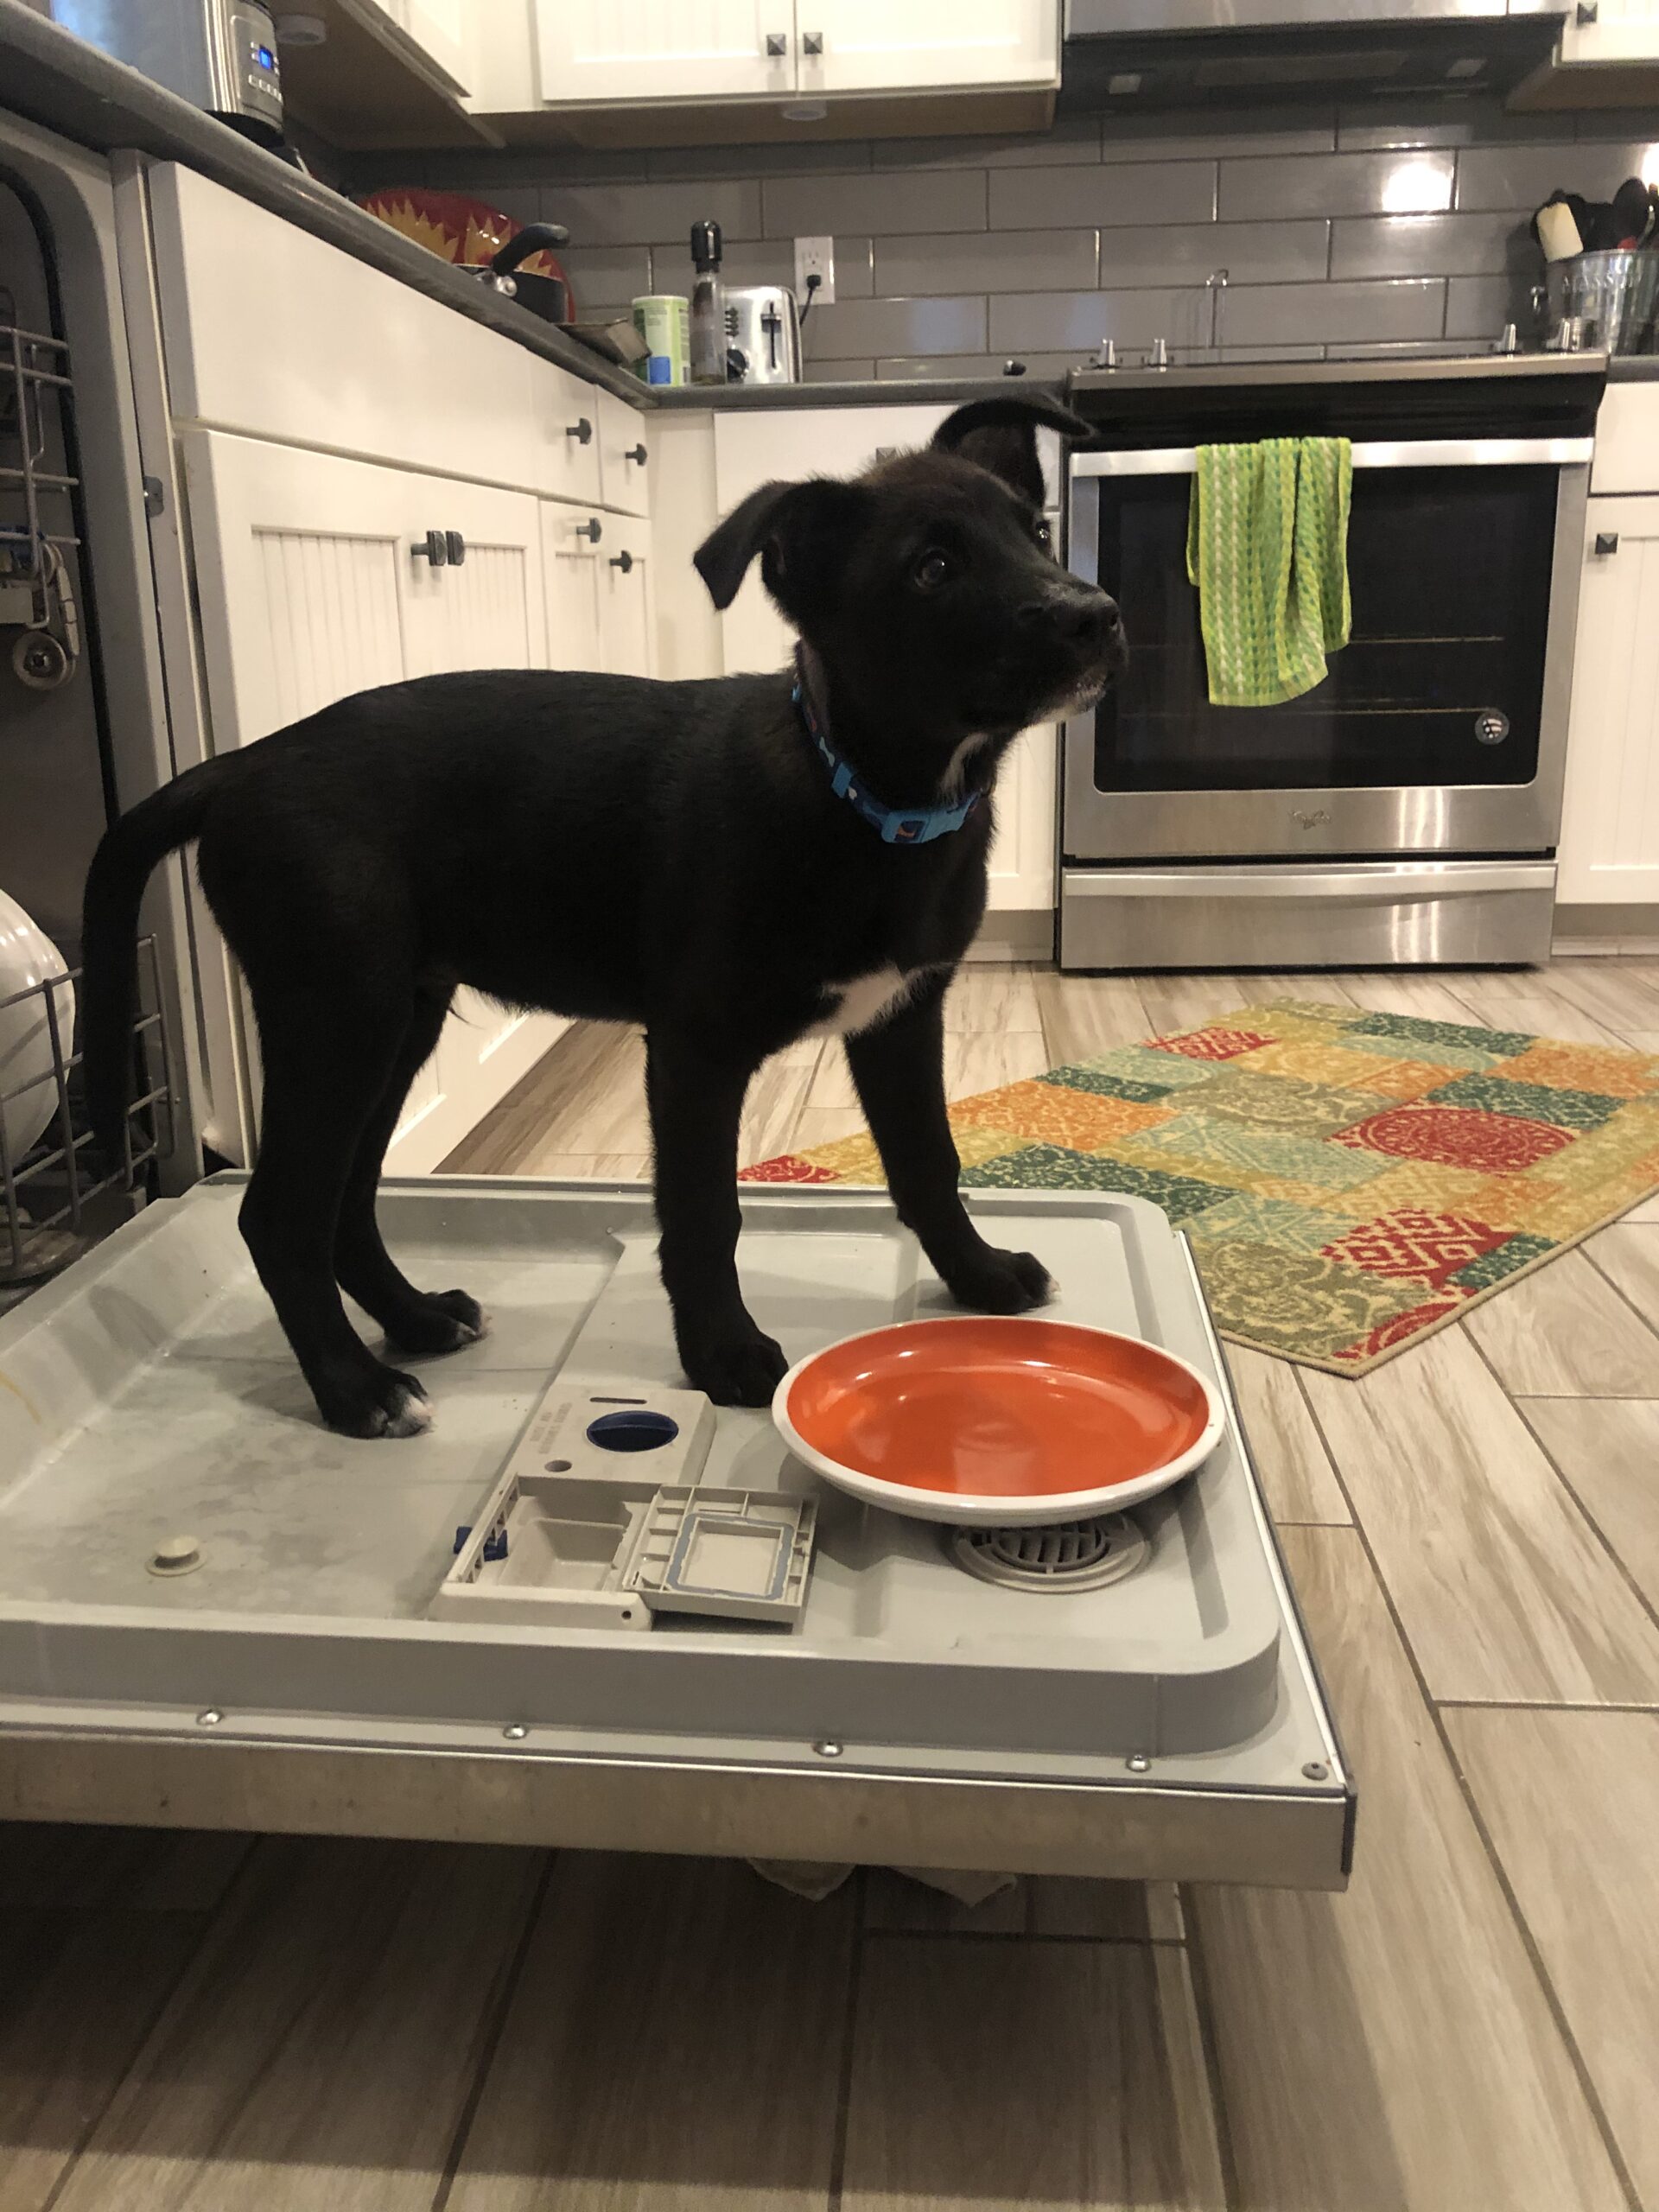 A black puppy standing on the door of an open dishwasher, licking dishes.